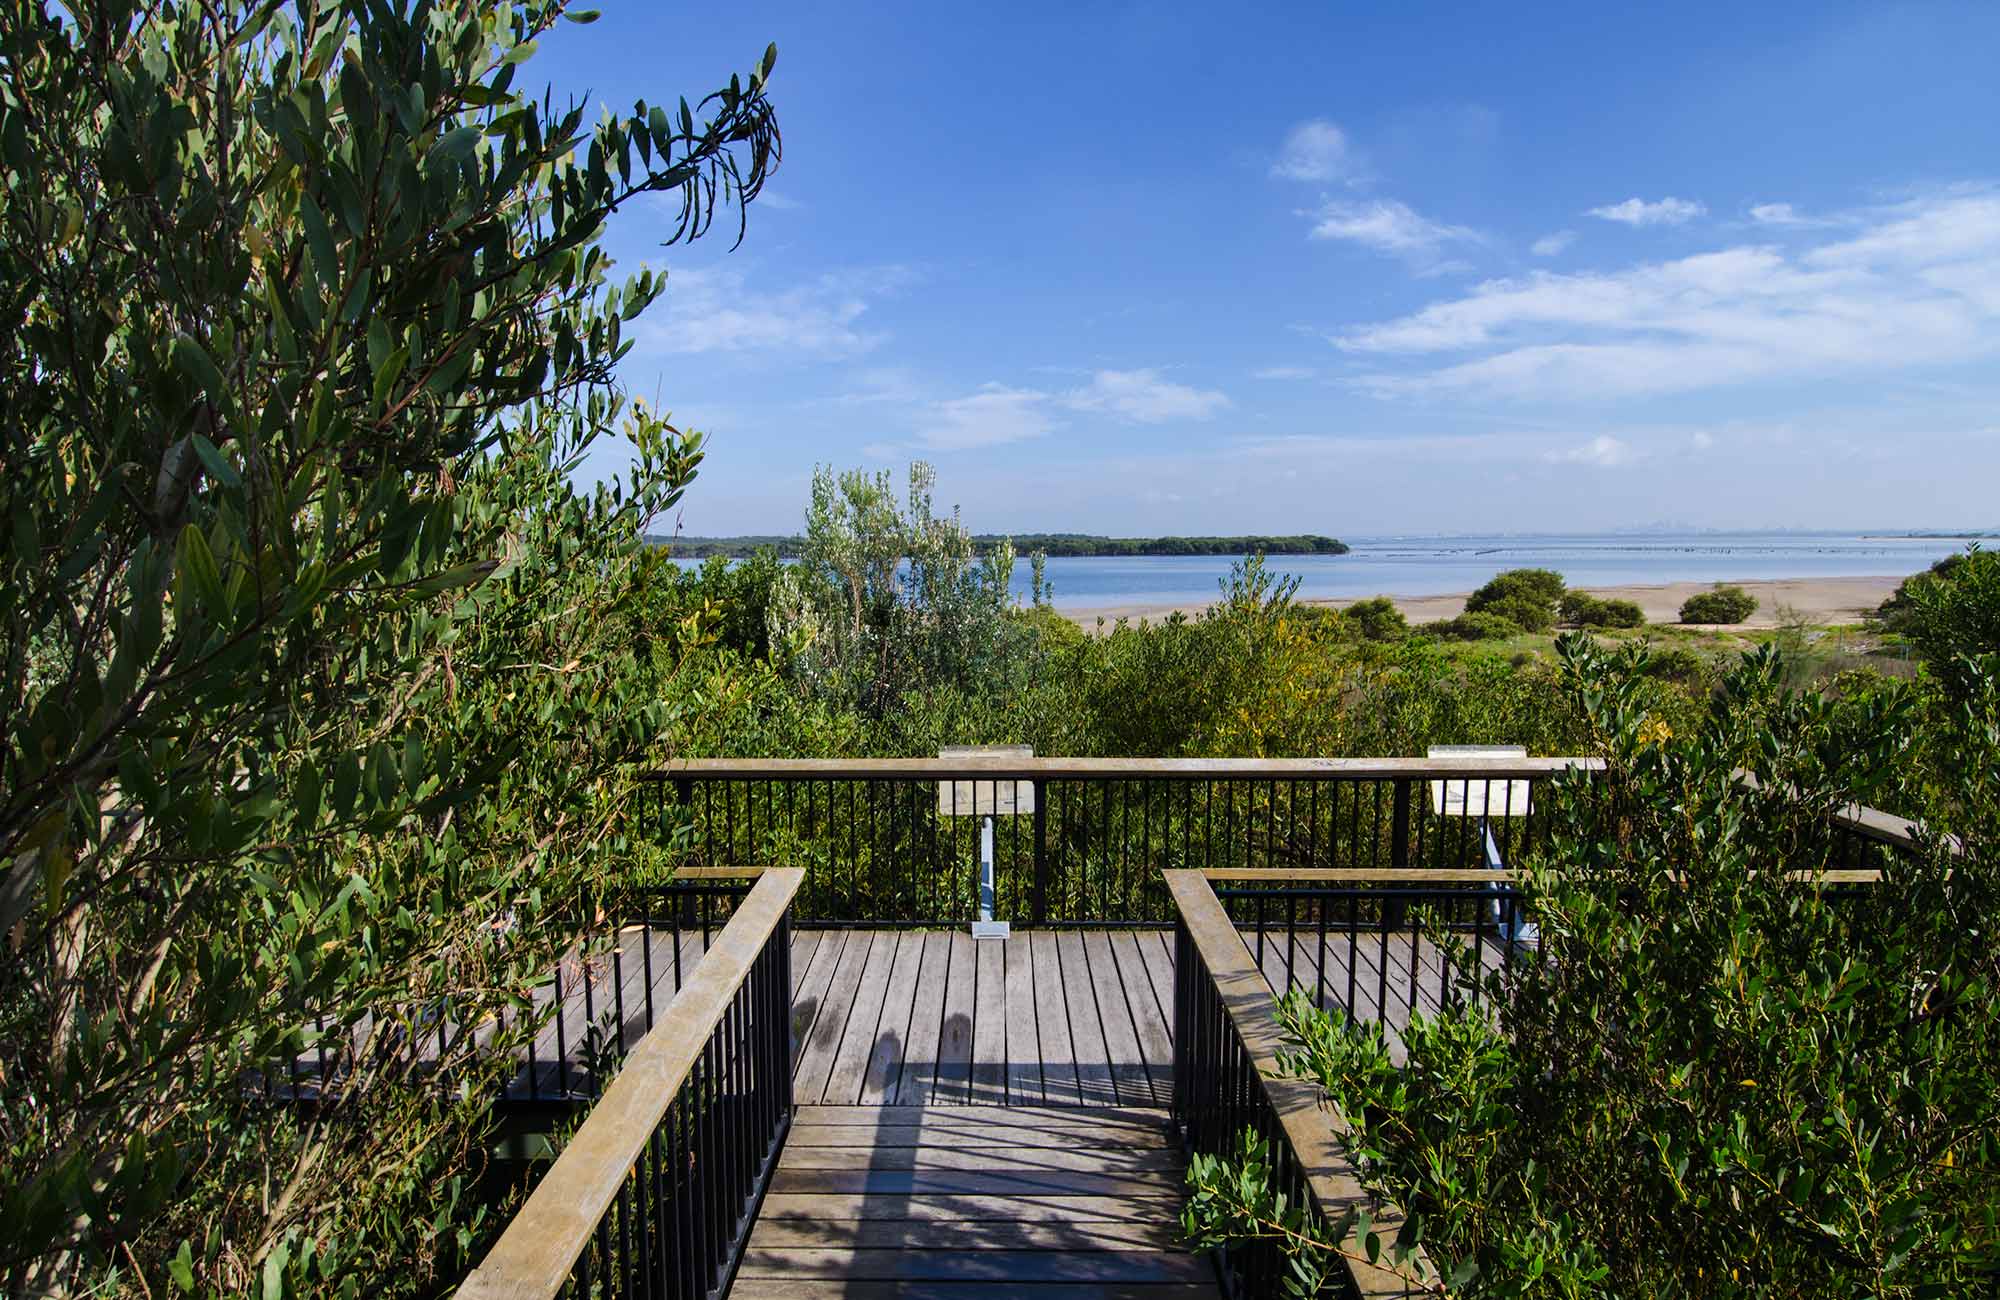 Quibray viewing platform, Towra Point Nature Reserve. Photo: John Spencer/NSW Government